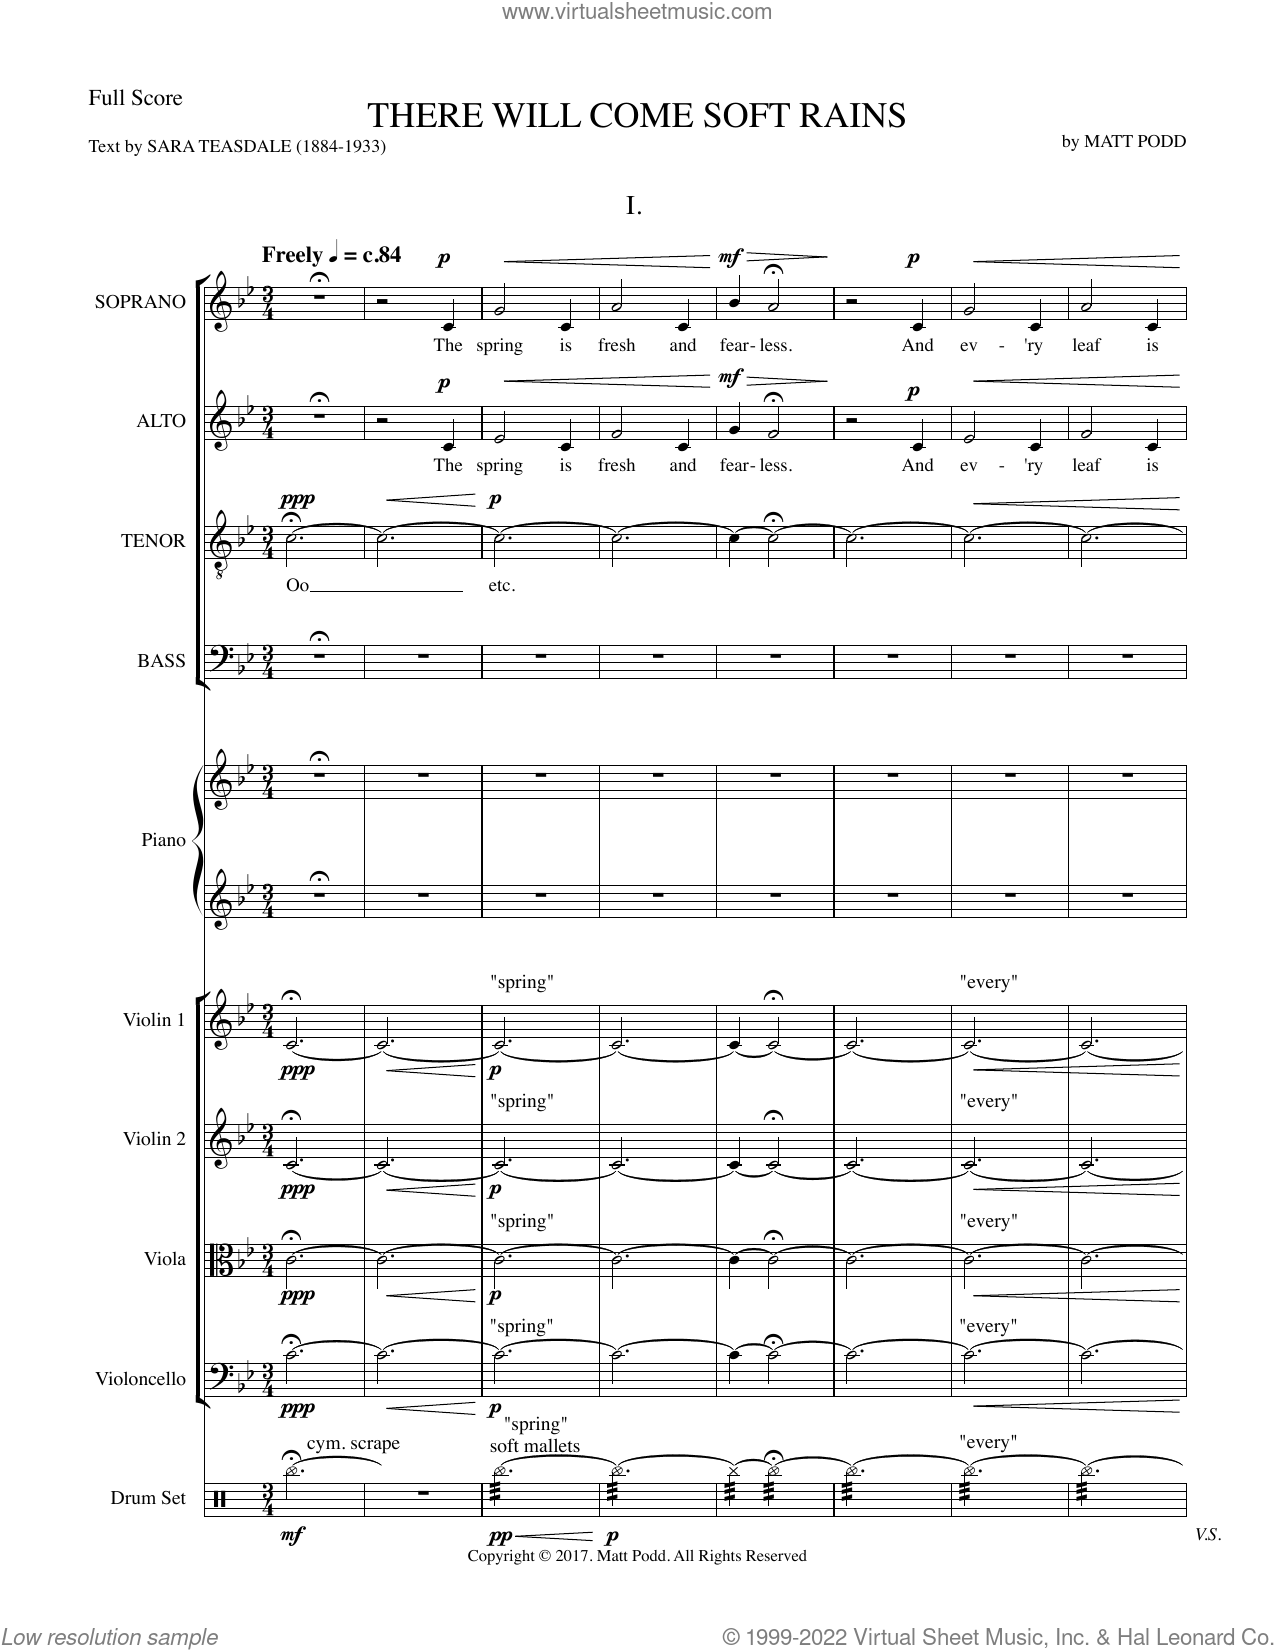 There Will Come Soft Rains sheet music collection) for